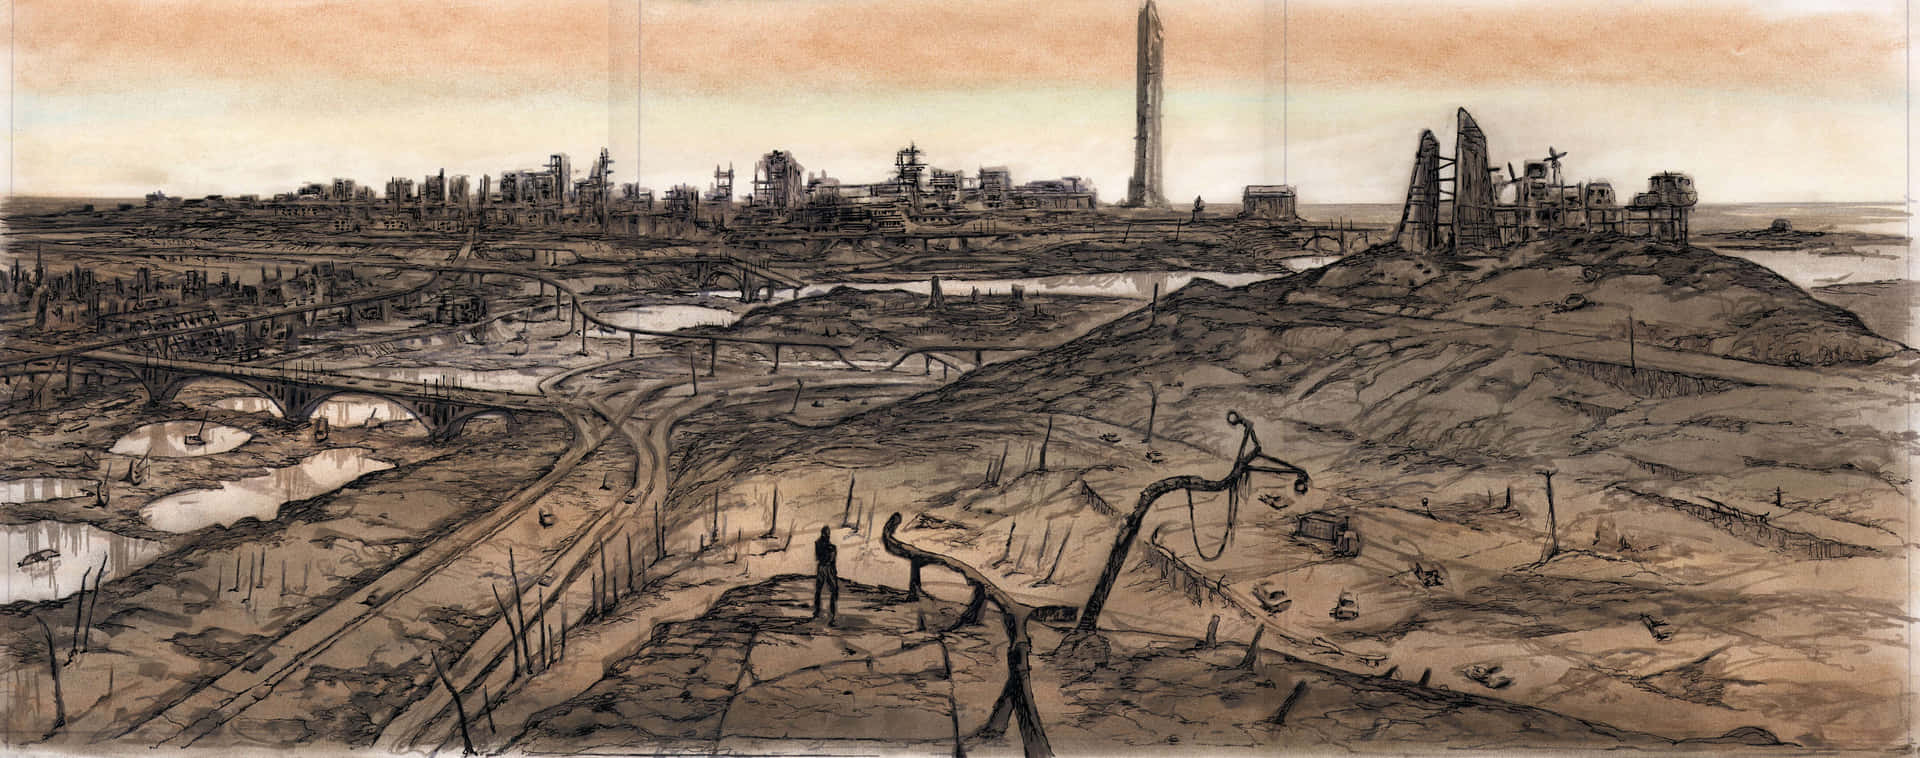 A Lone Wanderer in the Capital Wasteland of Fallout 4 Wallpaper